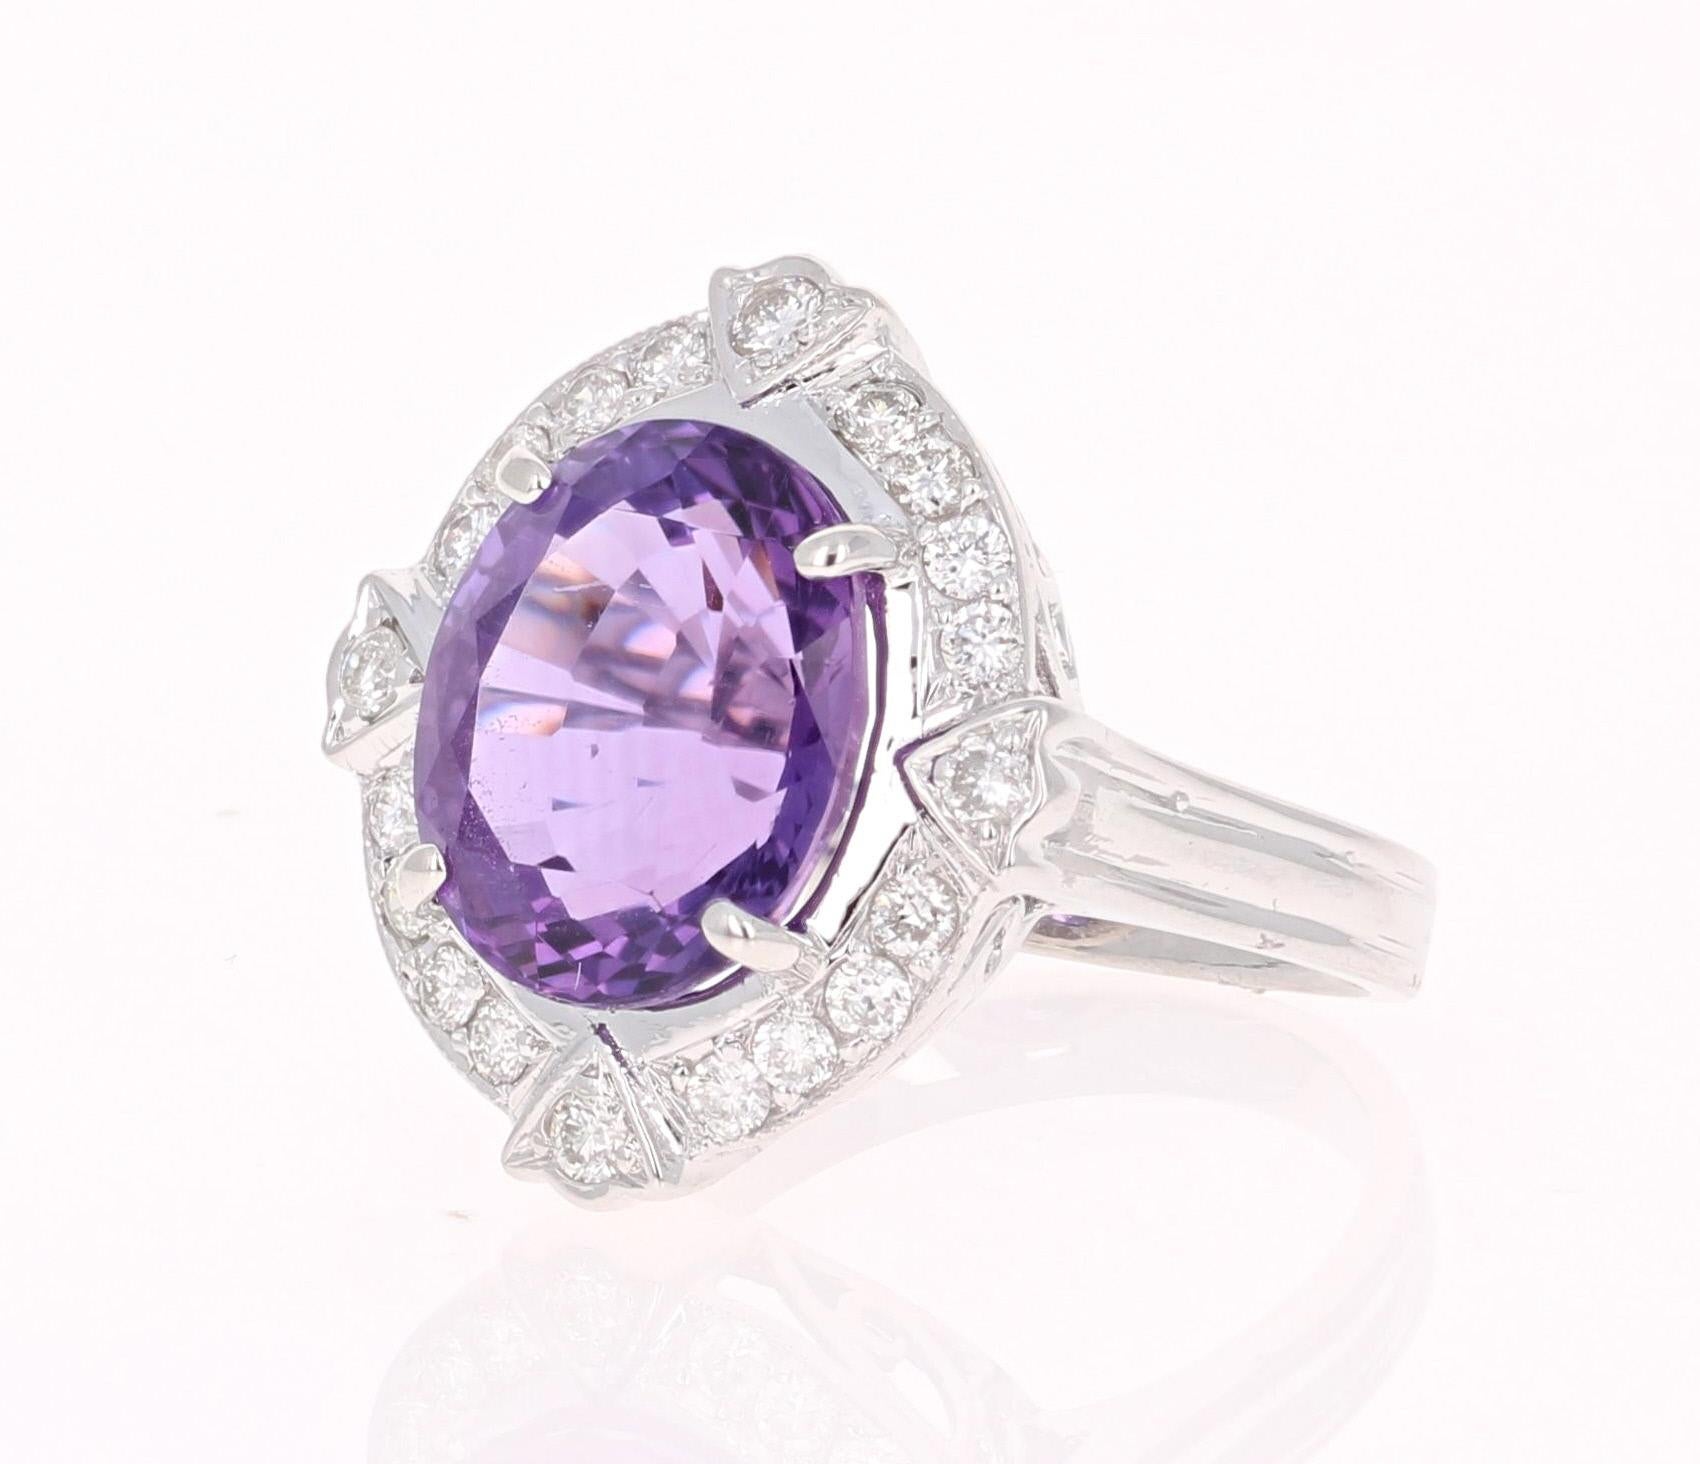 Contemporary 7.43 Carat Amethyst Diamond White Gold Art Deco Ring For Sale